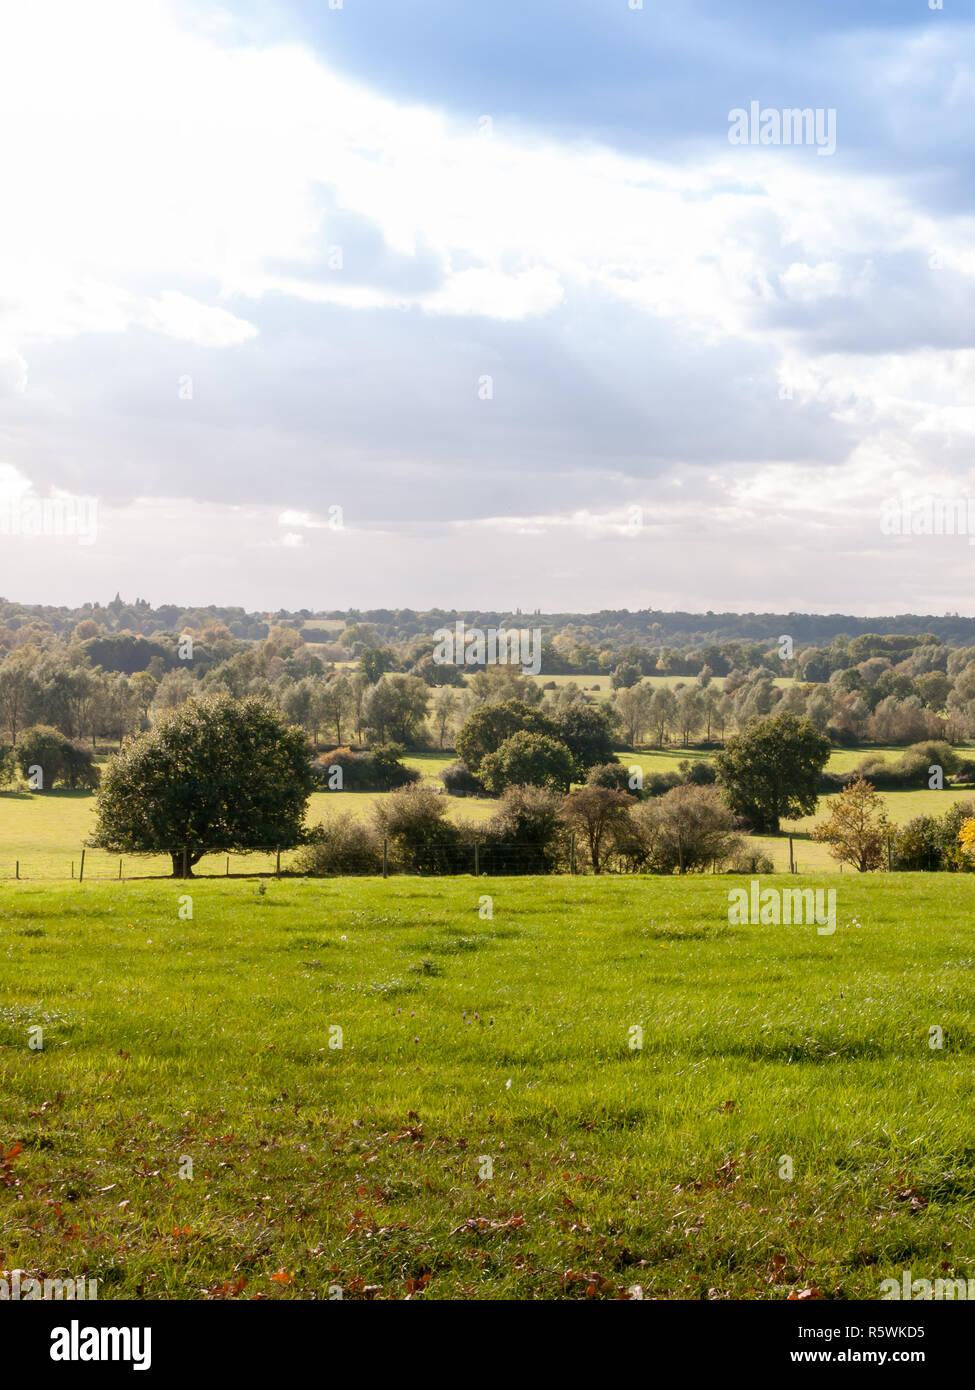 beautiful country side scene with grass lawn hills and trees day Stock Photo